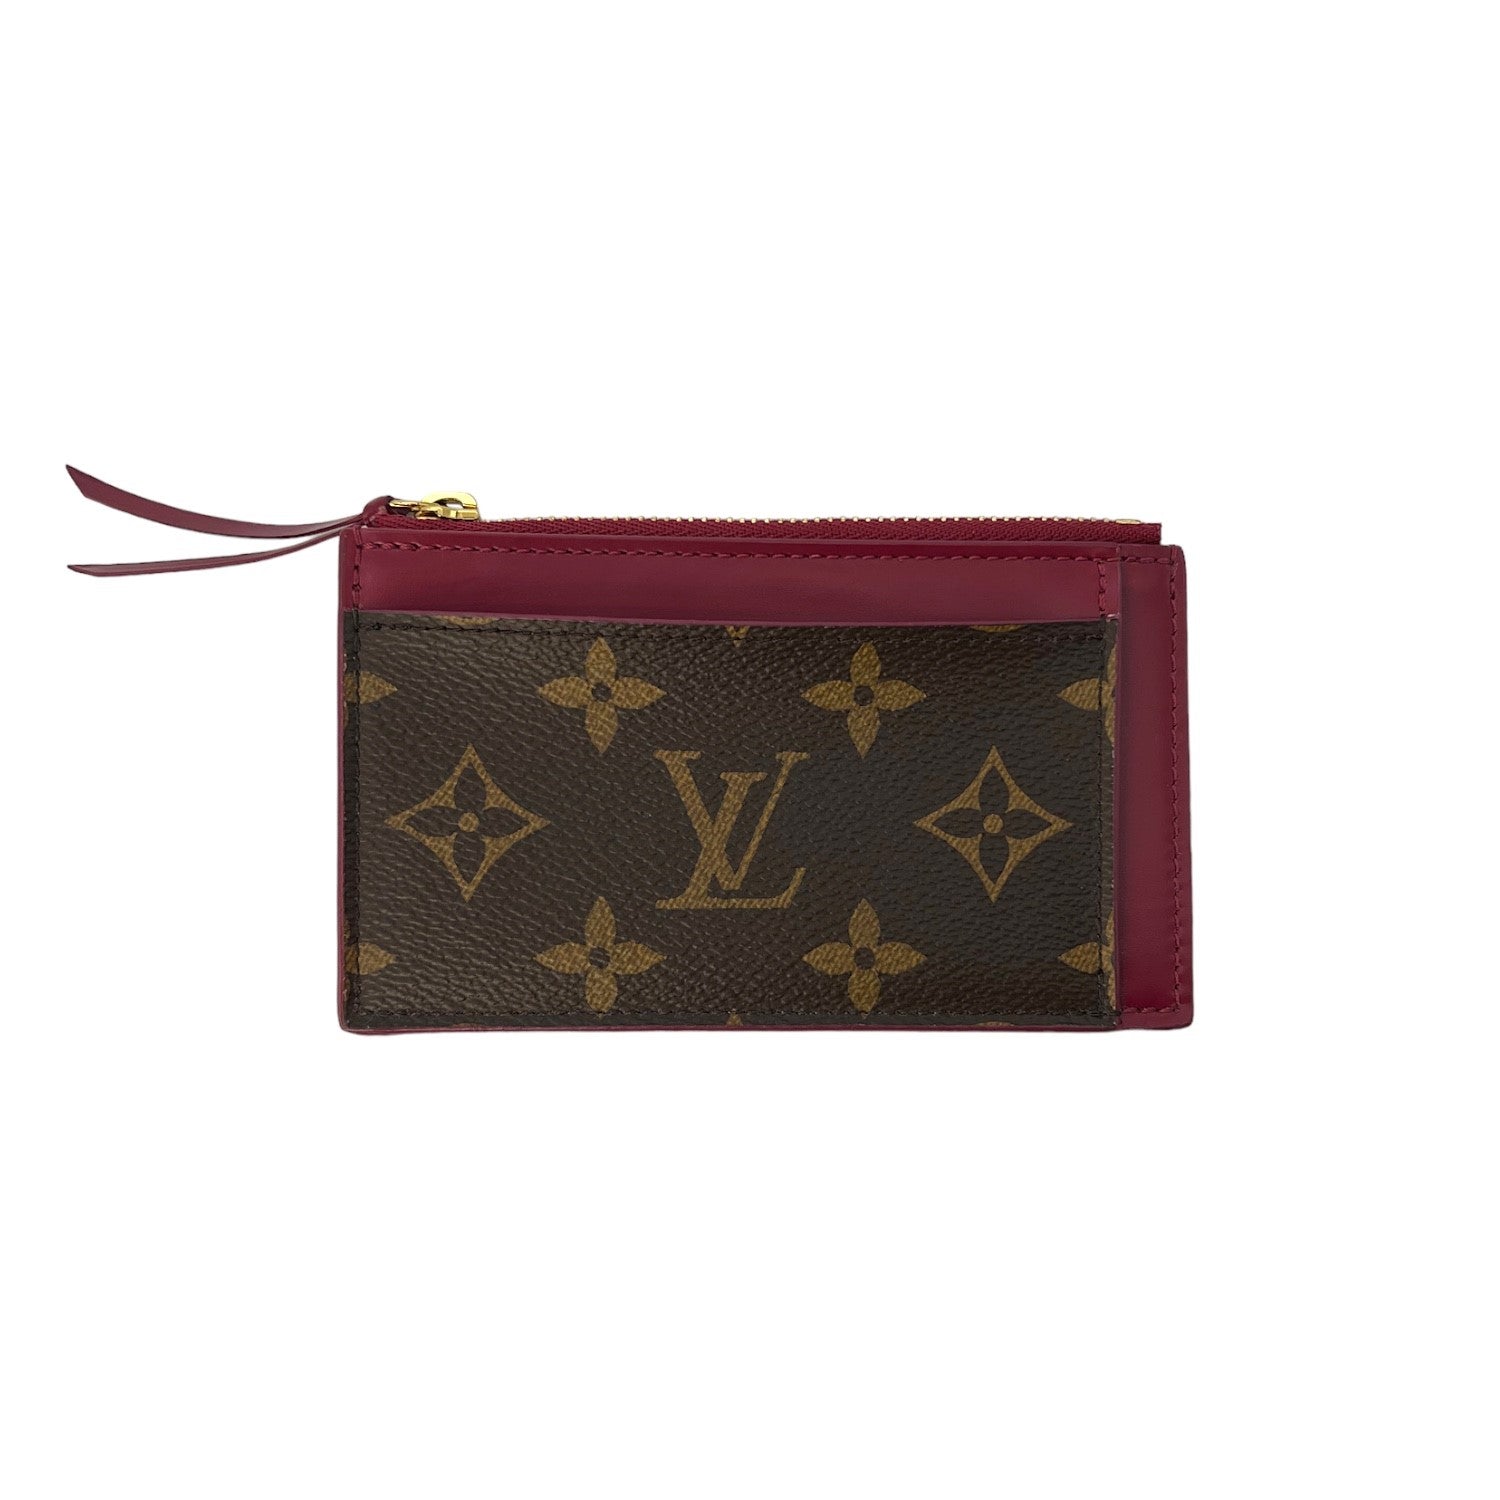 Emilie Wallet Monogram Reverse Canvas - Wallets and Small Leather Goods